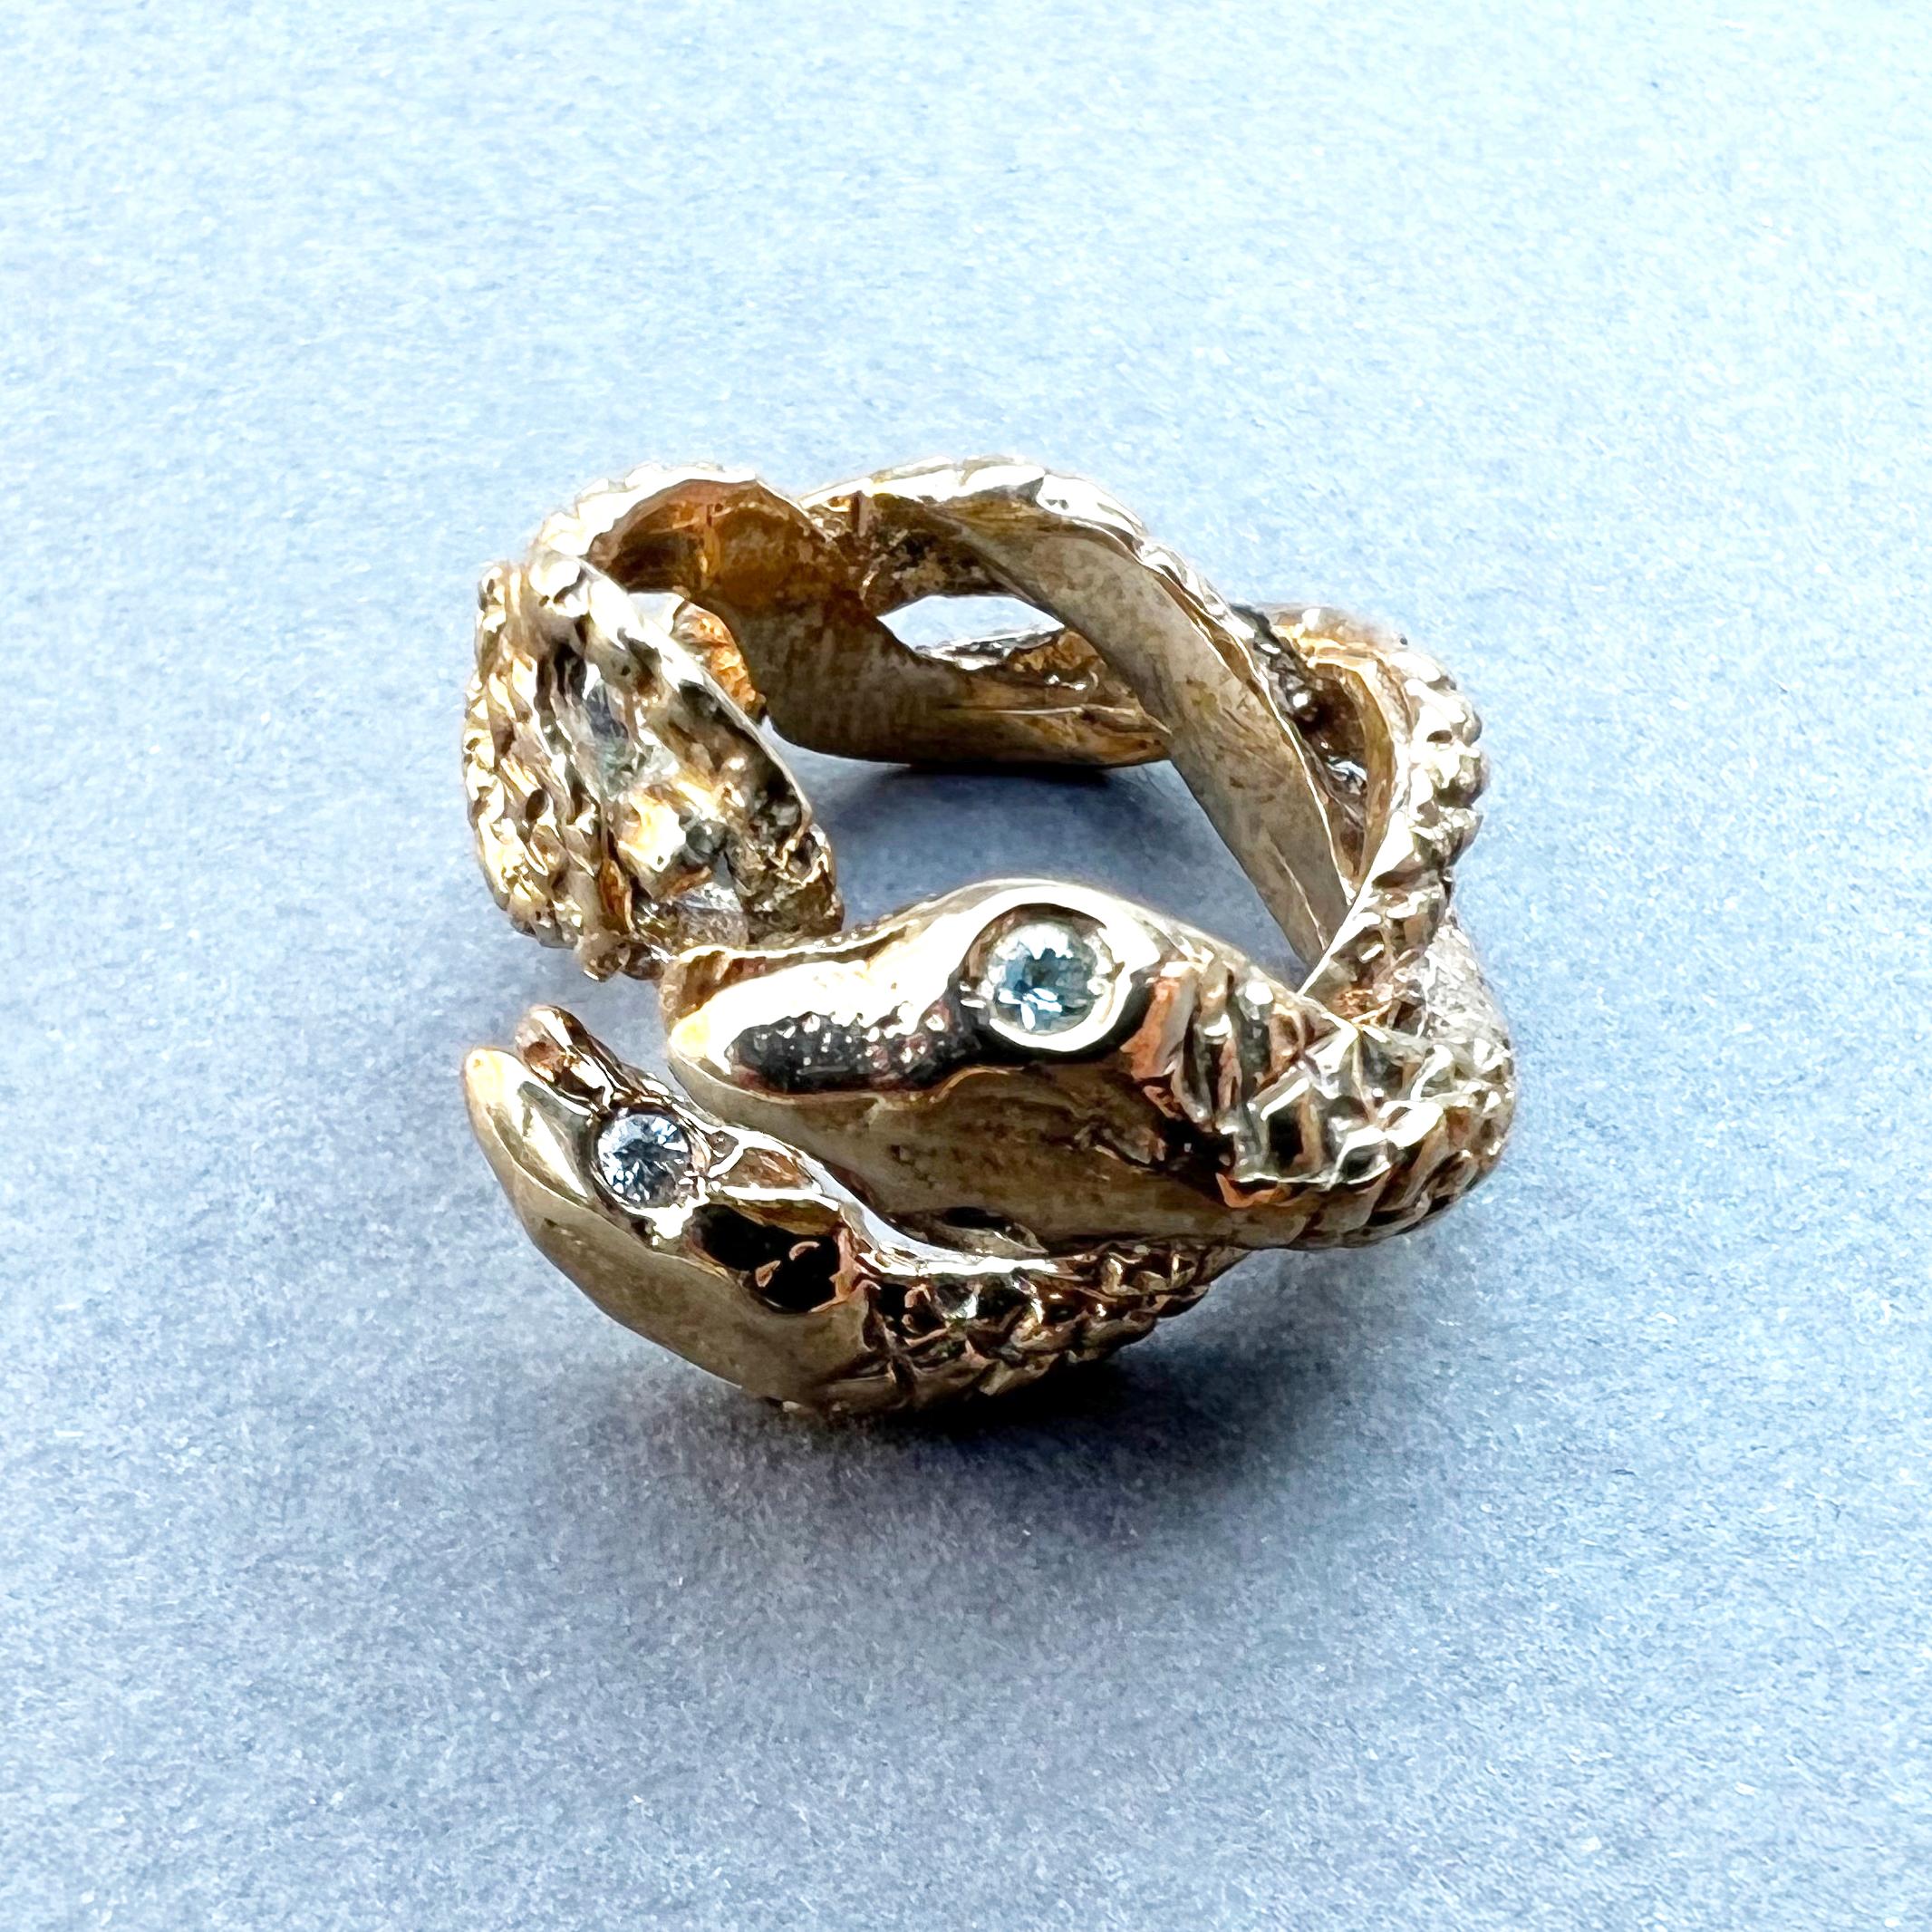 Contemporary Animal jewelry Aquamarine Snake Ring Bronze Cocktail Ring J Dauphin For Sale